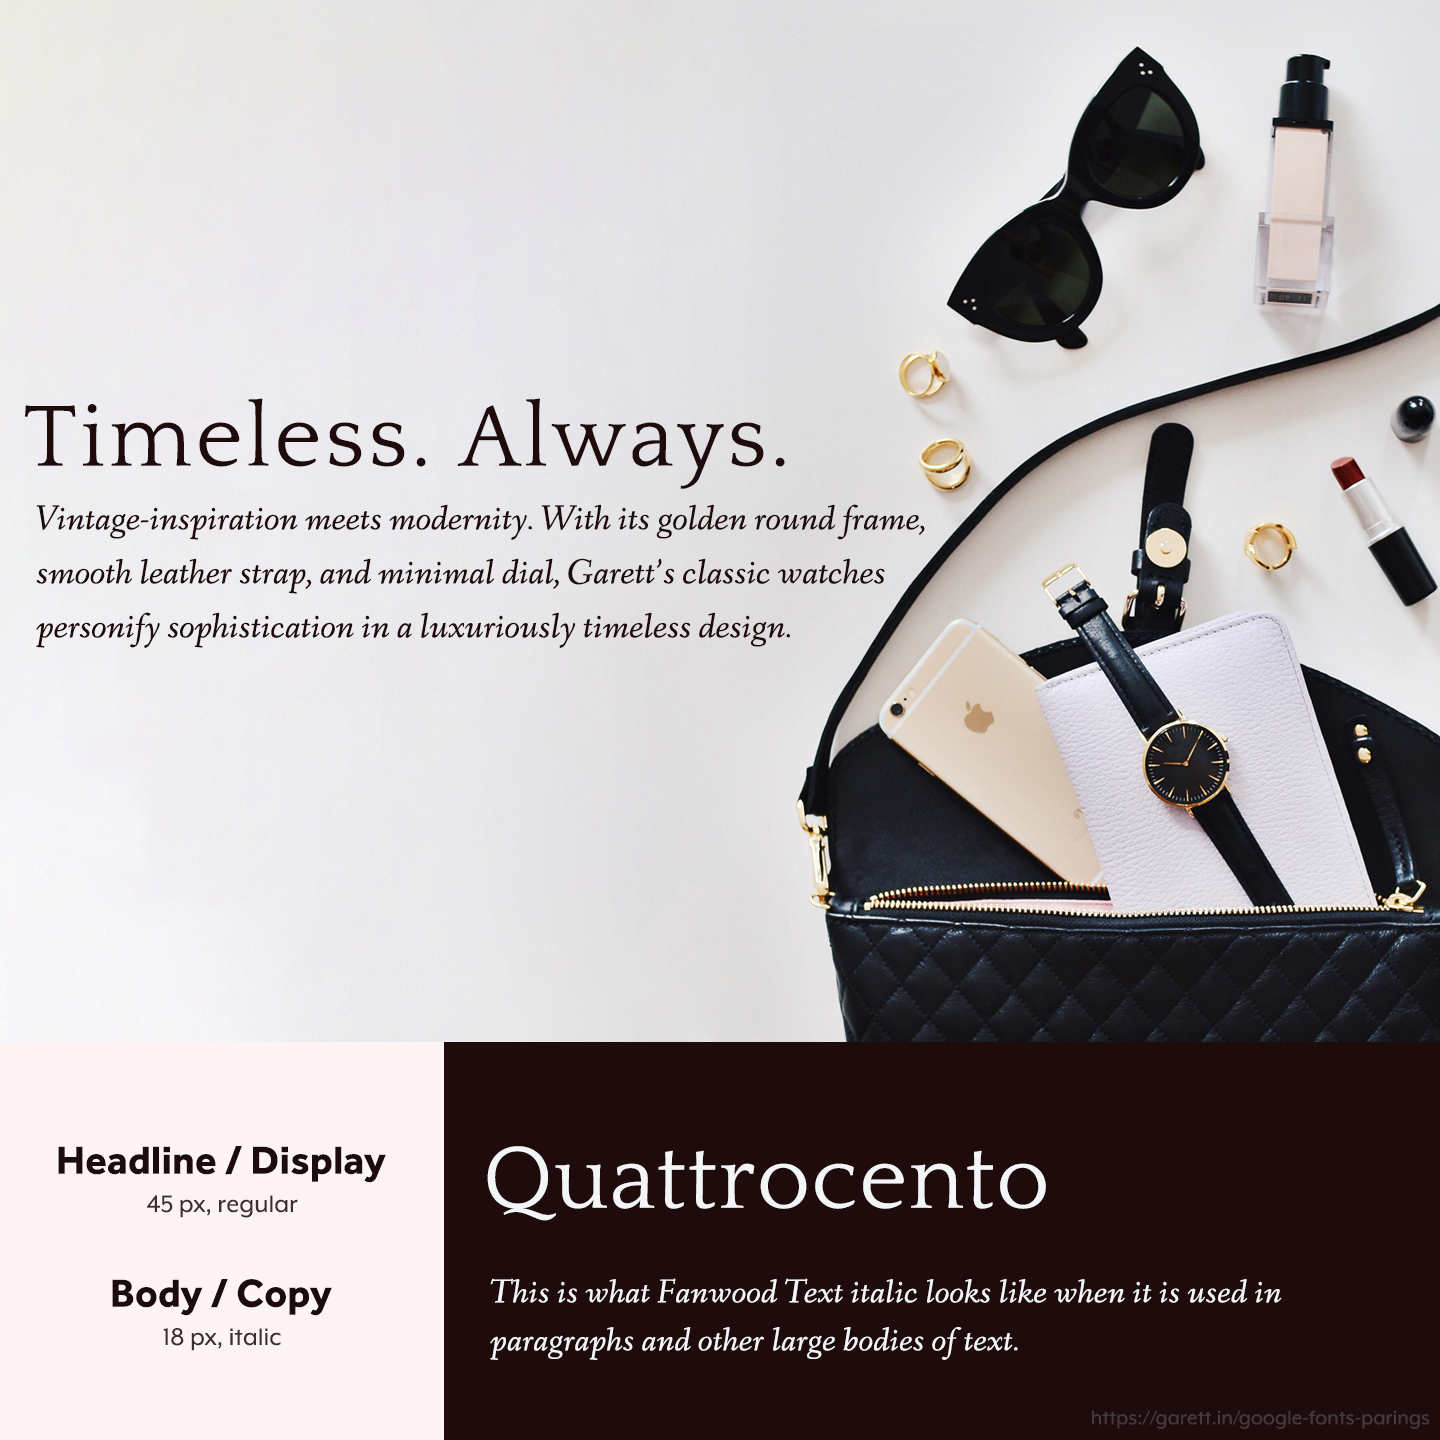 Quattrocento and Fanwood Text font pairing - 30 Google Font Pairings for Your Brand and Website